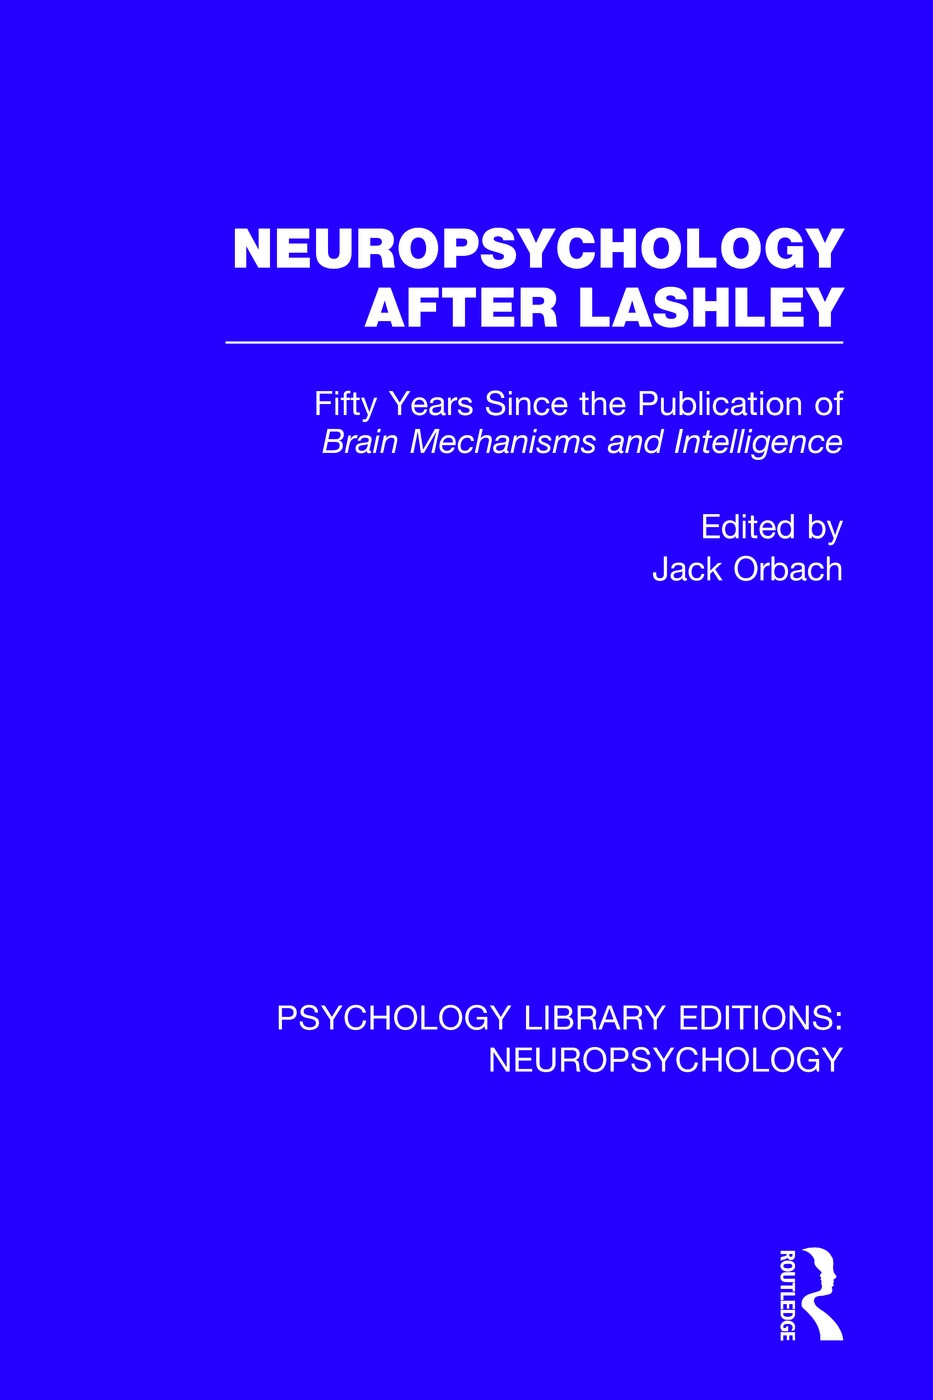 Neuropsychology After Lashley: Fifty Years Since the Publication of Brain Mechanisms and Intelligence